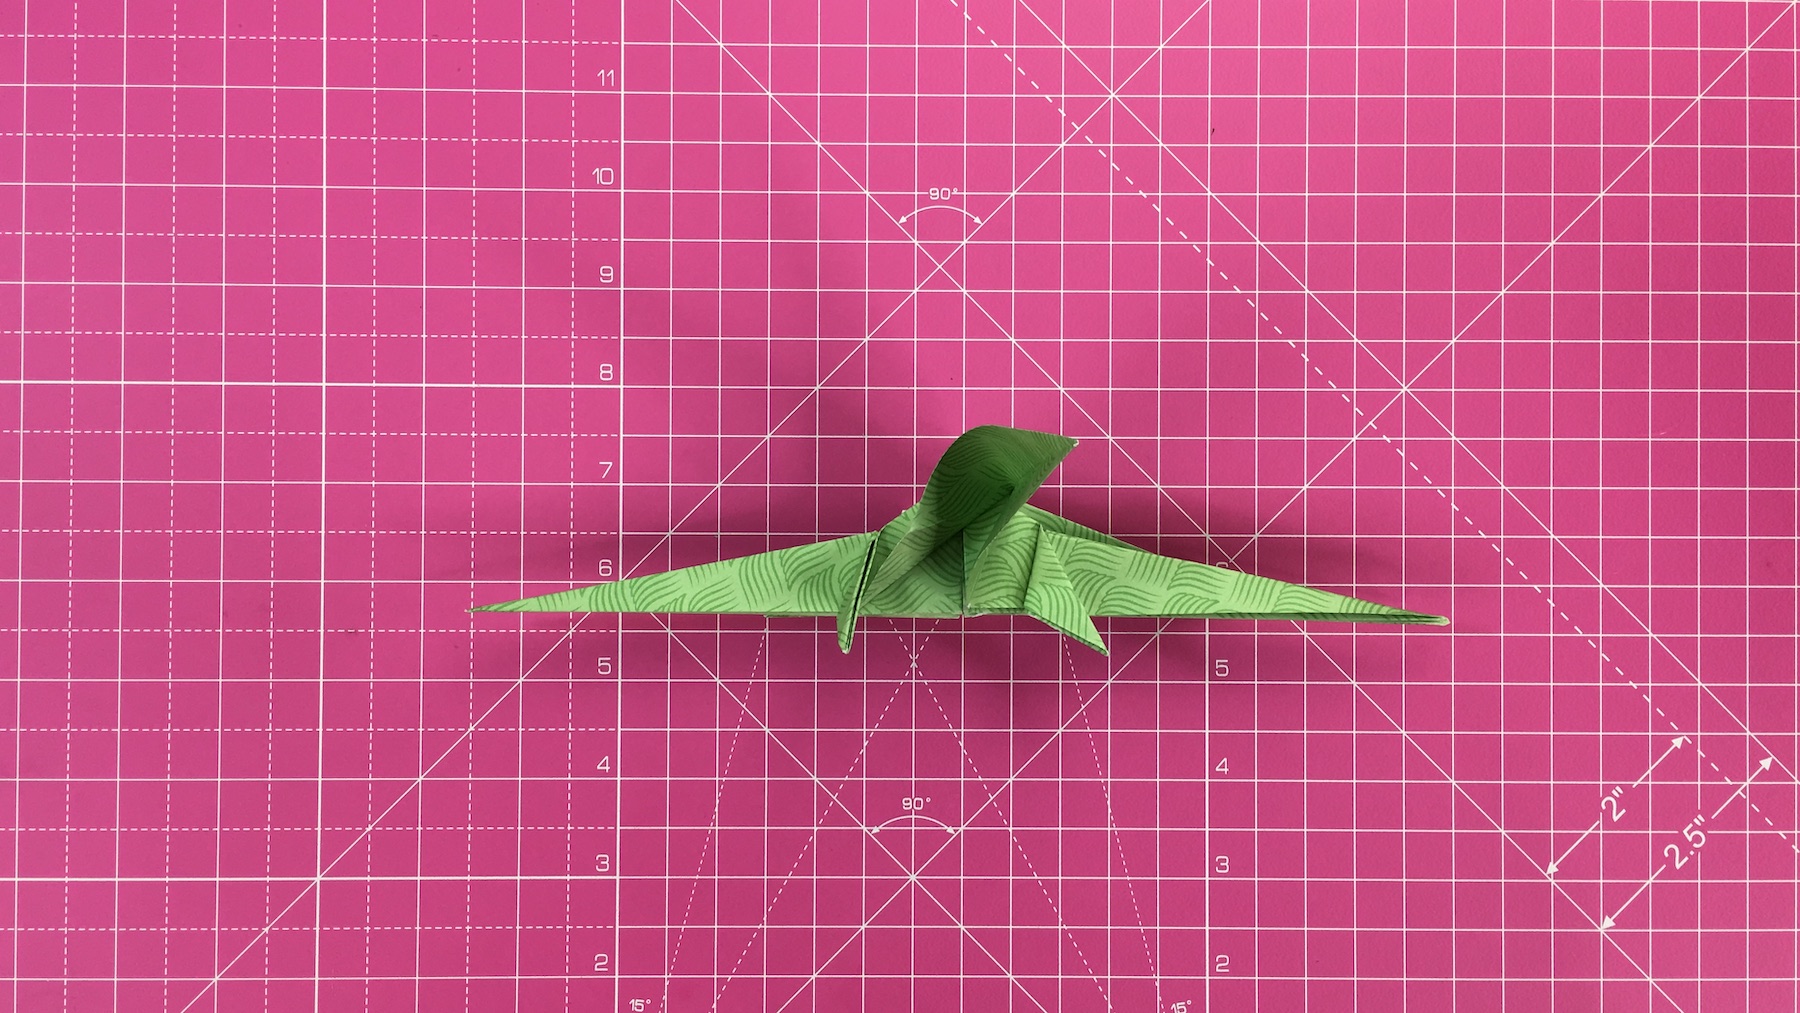 How to make an origami dragon, origami dragon tutorial - step 39a